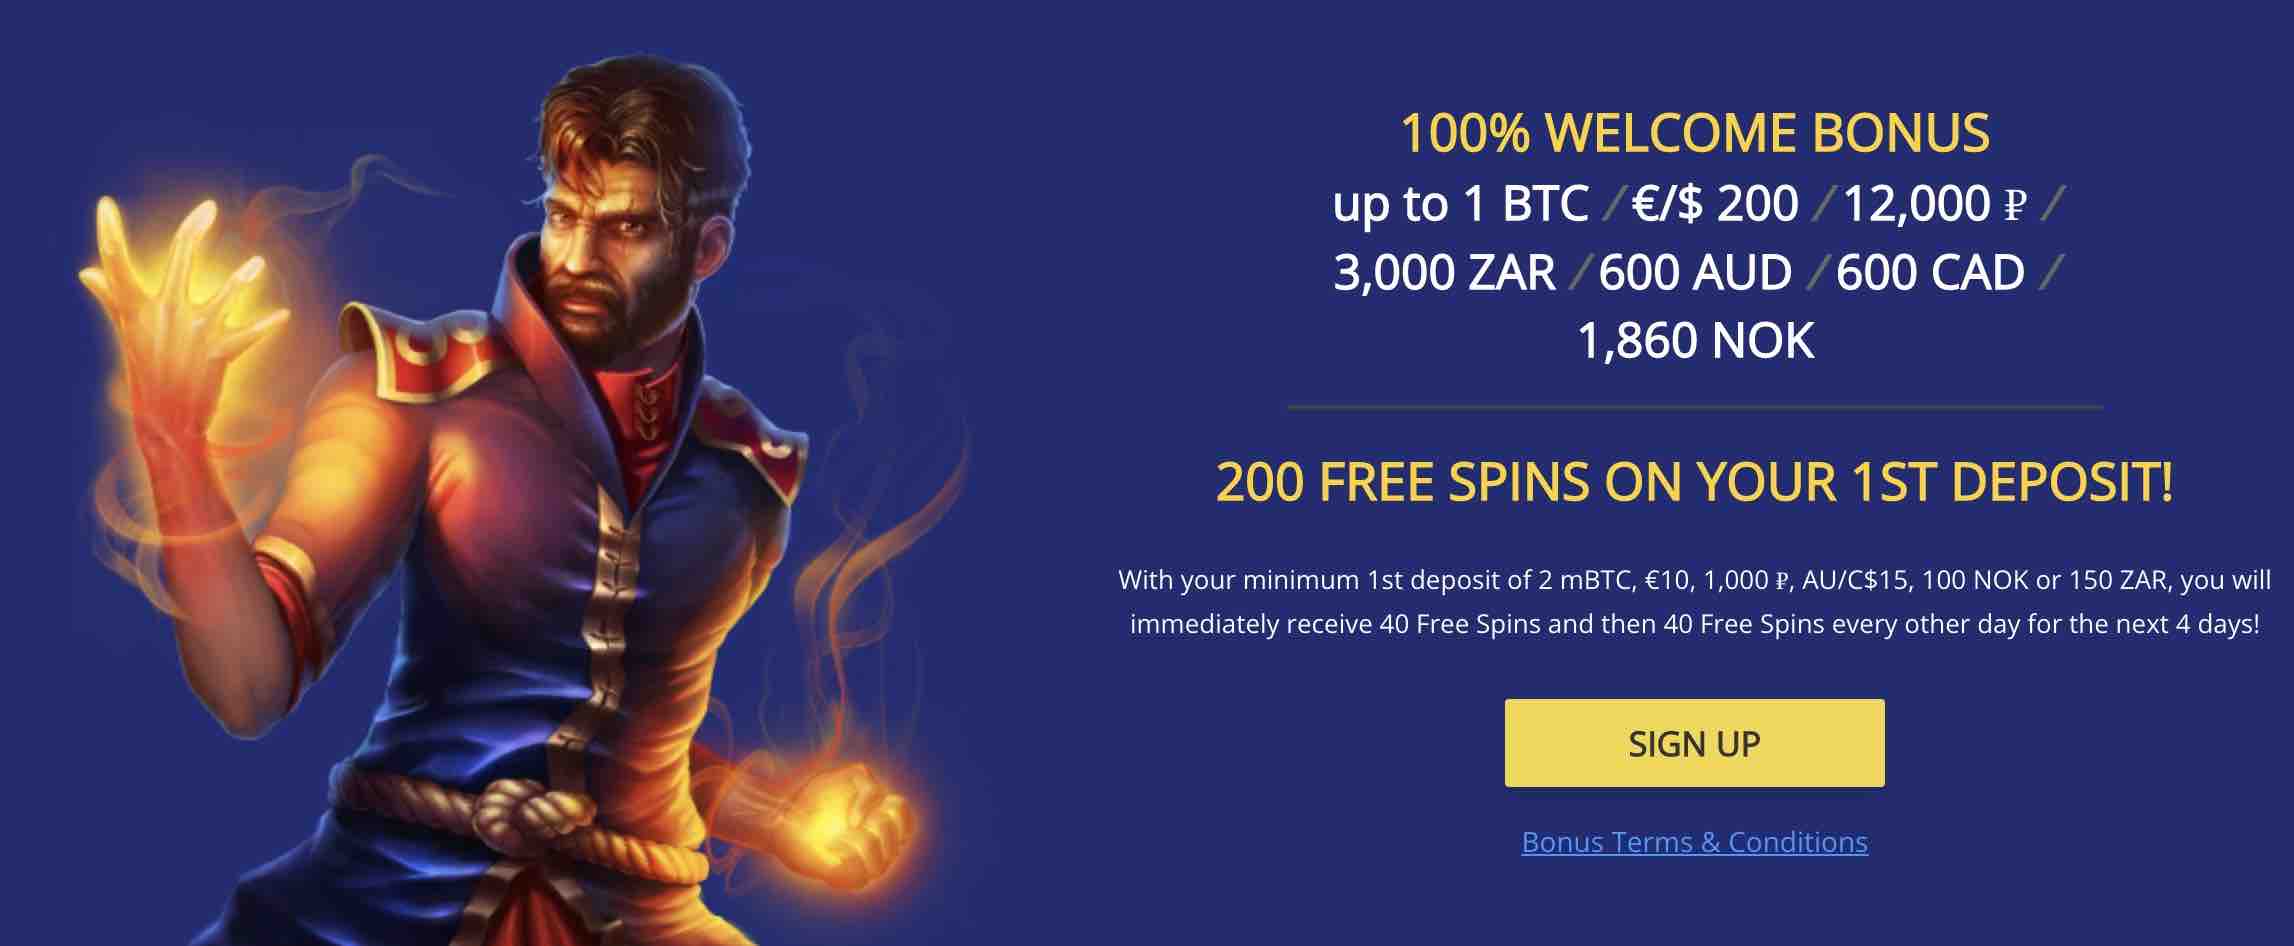 Screenshot of the banner ad of the Betchain Welcome Bonus